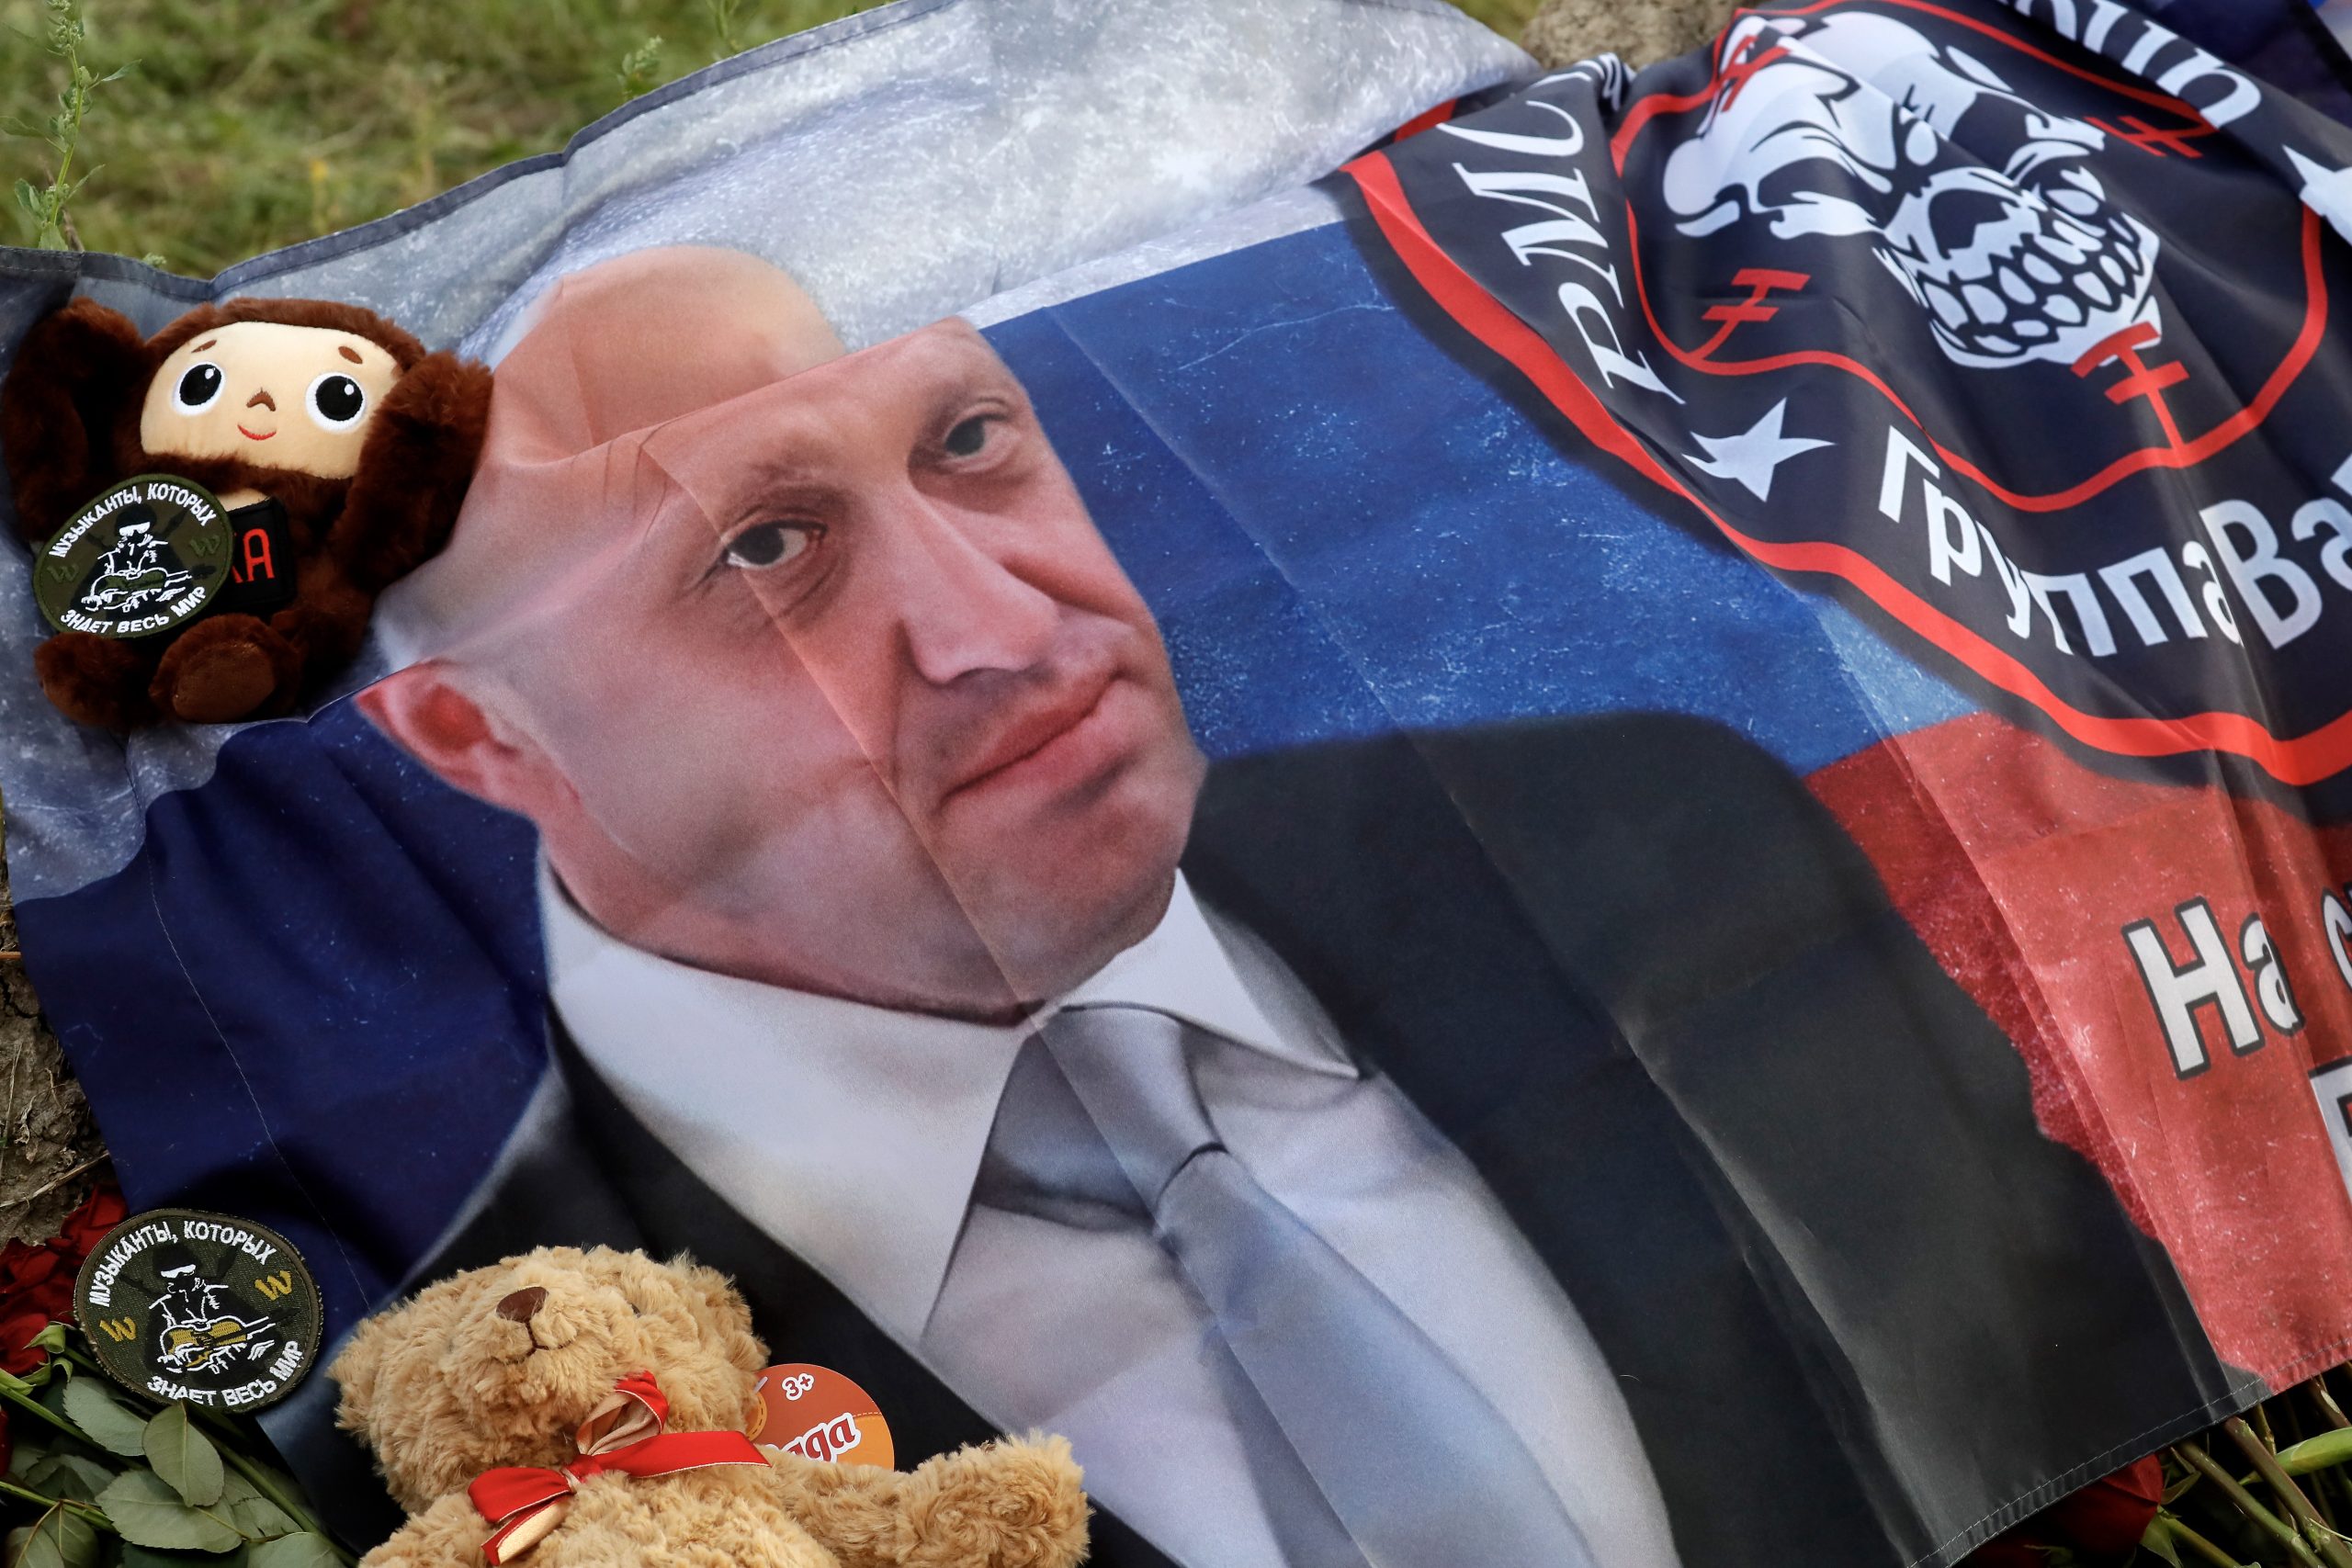 epa10820022 A flag with the image of Yevgeny Prigozhin and the emblem of the Wagner Group (PMC Wagner) is seen at an informal memorial held next to the former 'PMC Wagner Centre' in St. Petersburg, Russia, 25 August 2023. An investigation was launched into the crash of an aircraft in the Tver region in Russia on 23 August 2023, the Russian Federal Air Transport Agency said in a statement. Among the passengers was Wagner chief Yevgeny Prigozhin, the agency reported.  EPA/ANATOLY MALTSEV